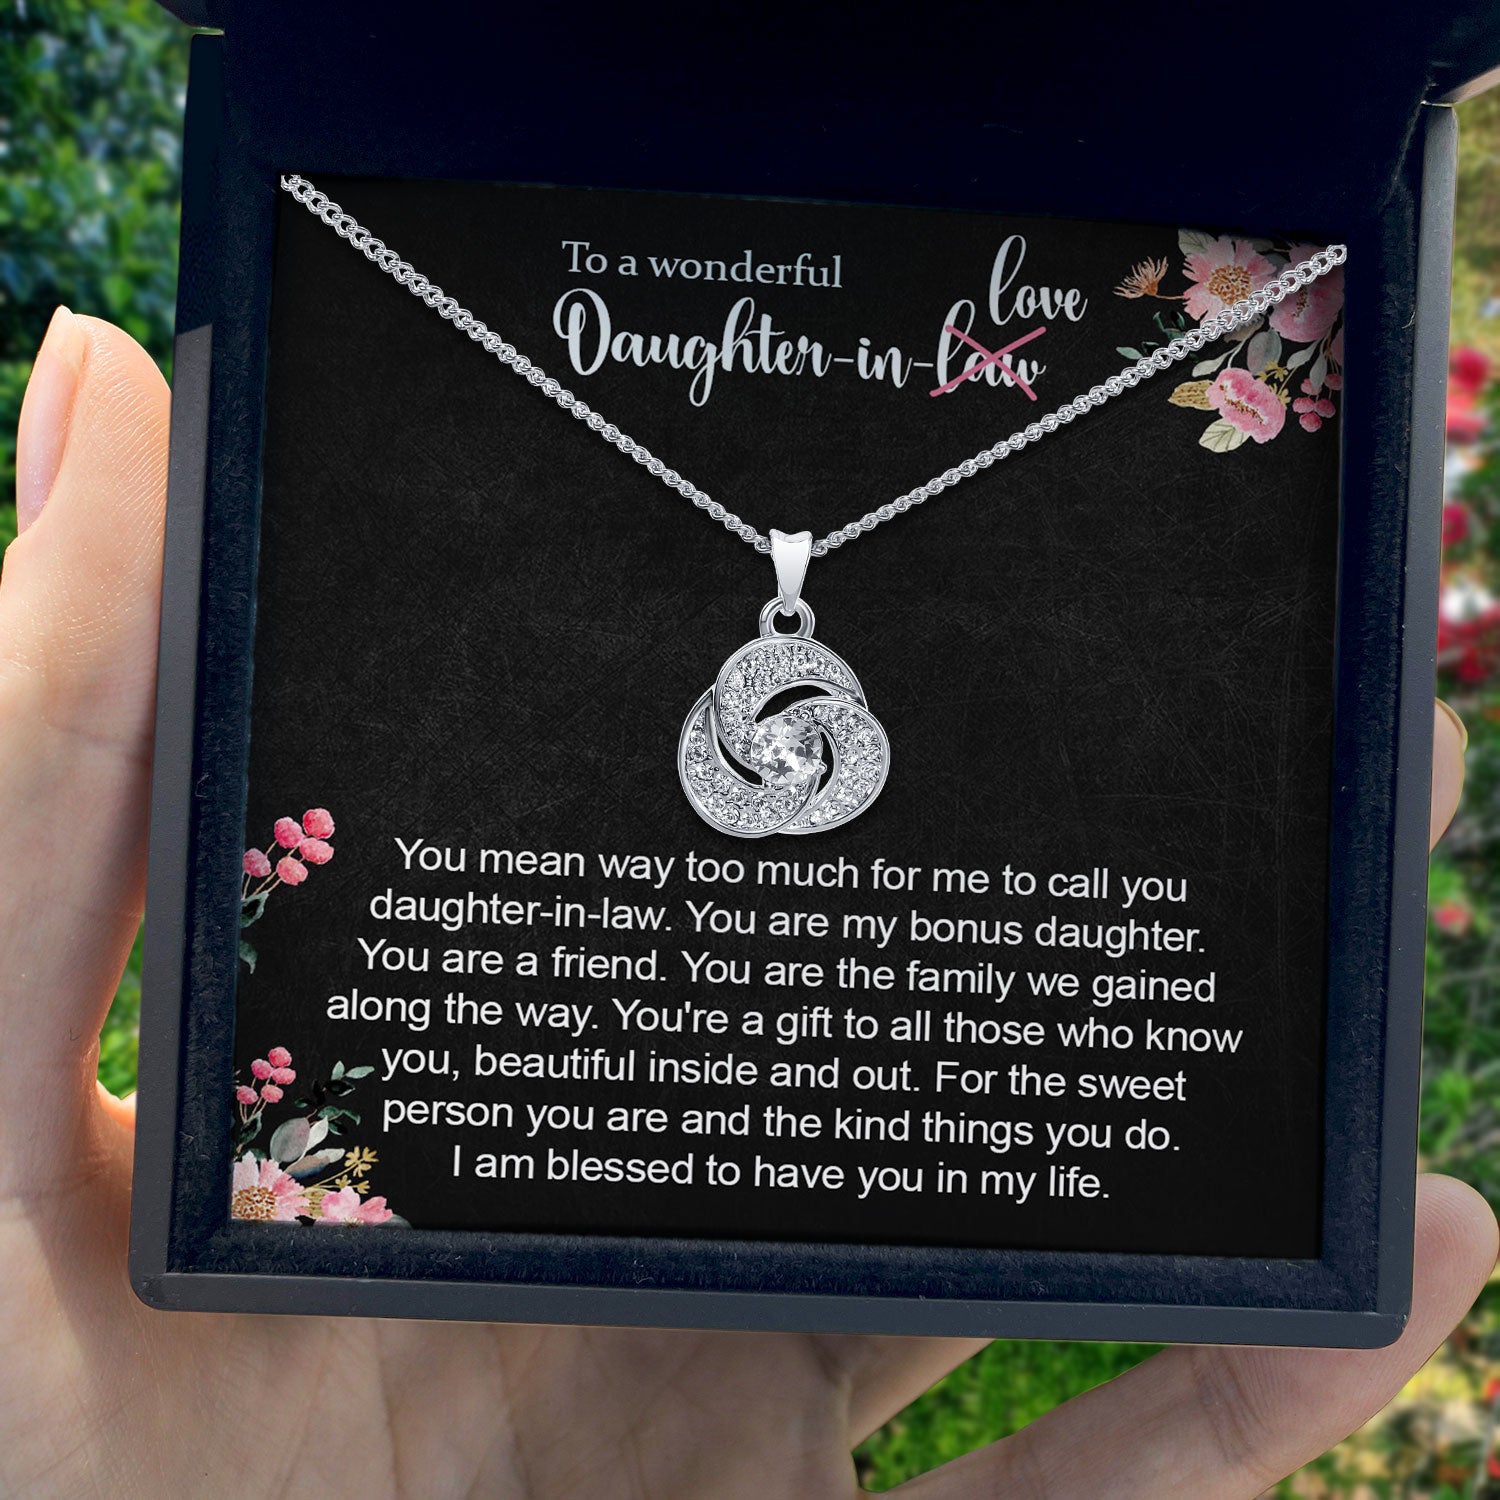 To My Wonderful Daughter-in-Love - I am Blessed to Have You In My Life - Tryndi Love Knot Necklace